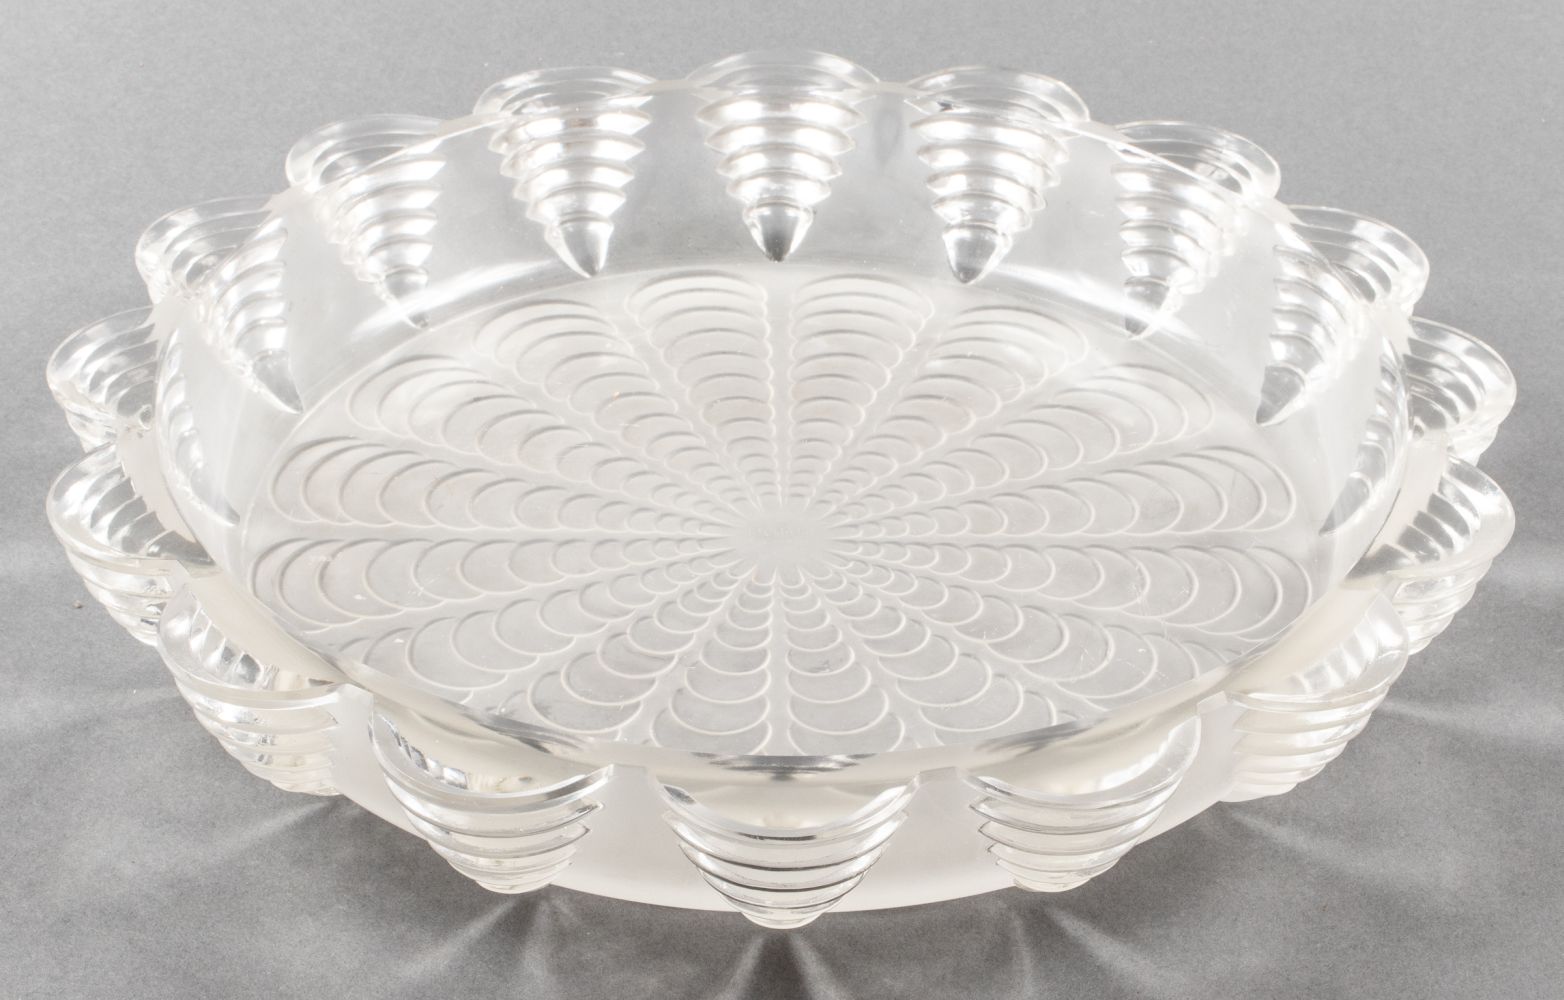 R LALIQUE FROSTED ART GLASS CENTERPIECE 3c4dac